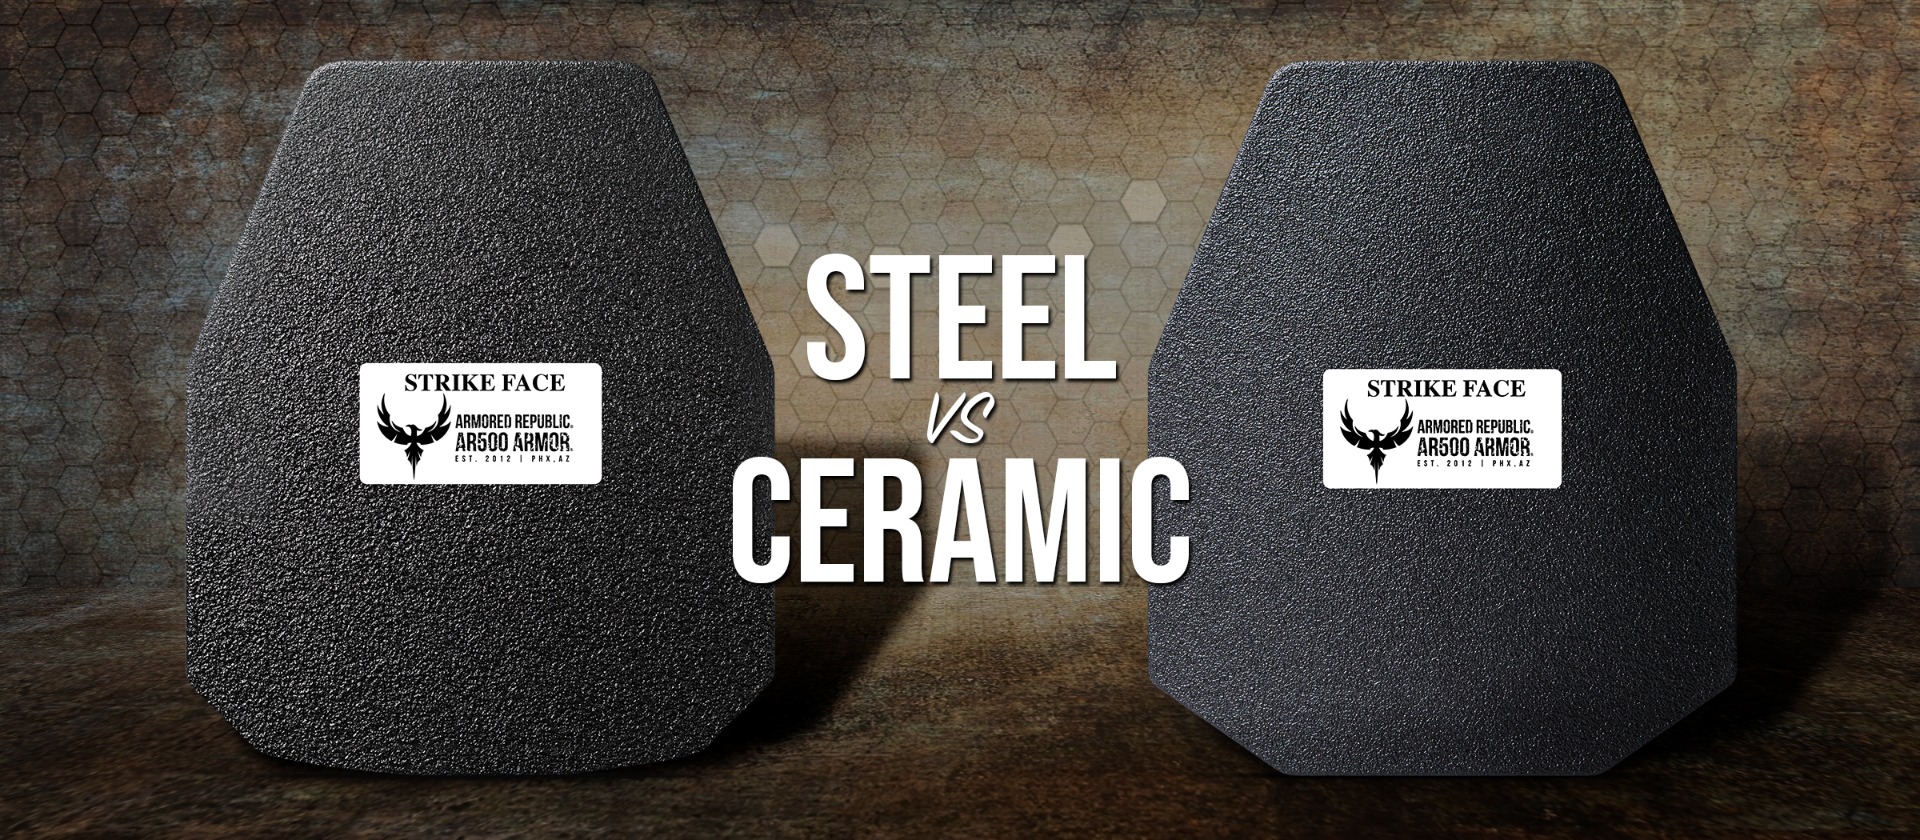 Ceramic vs Steel Body Armor: Which One Protects You Better?